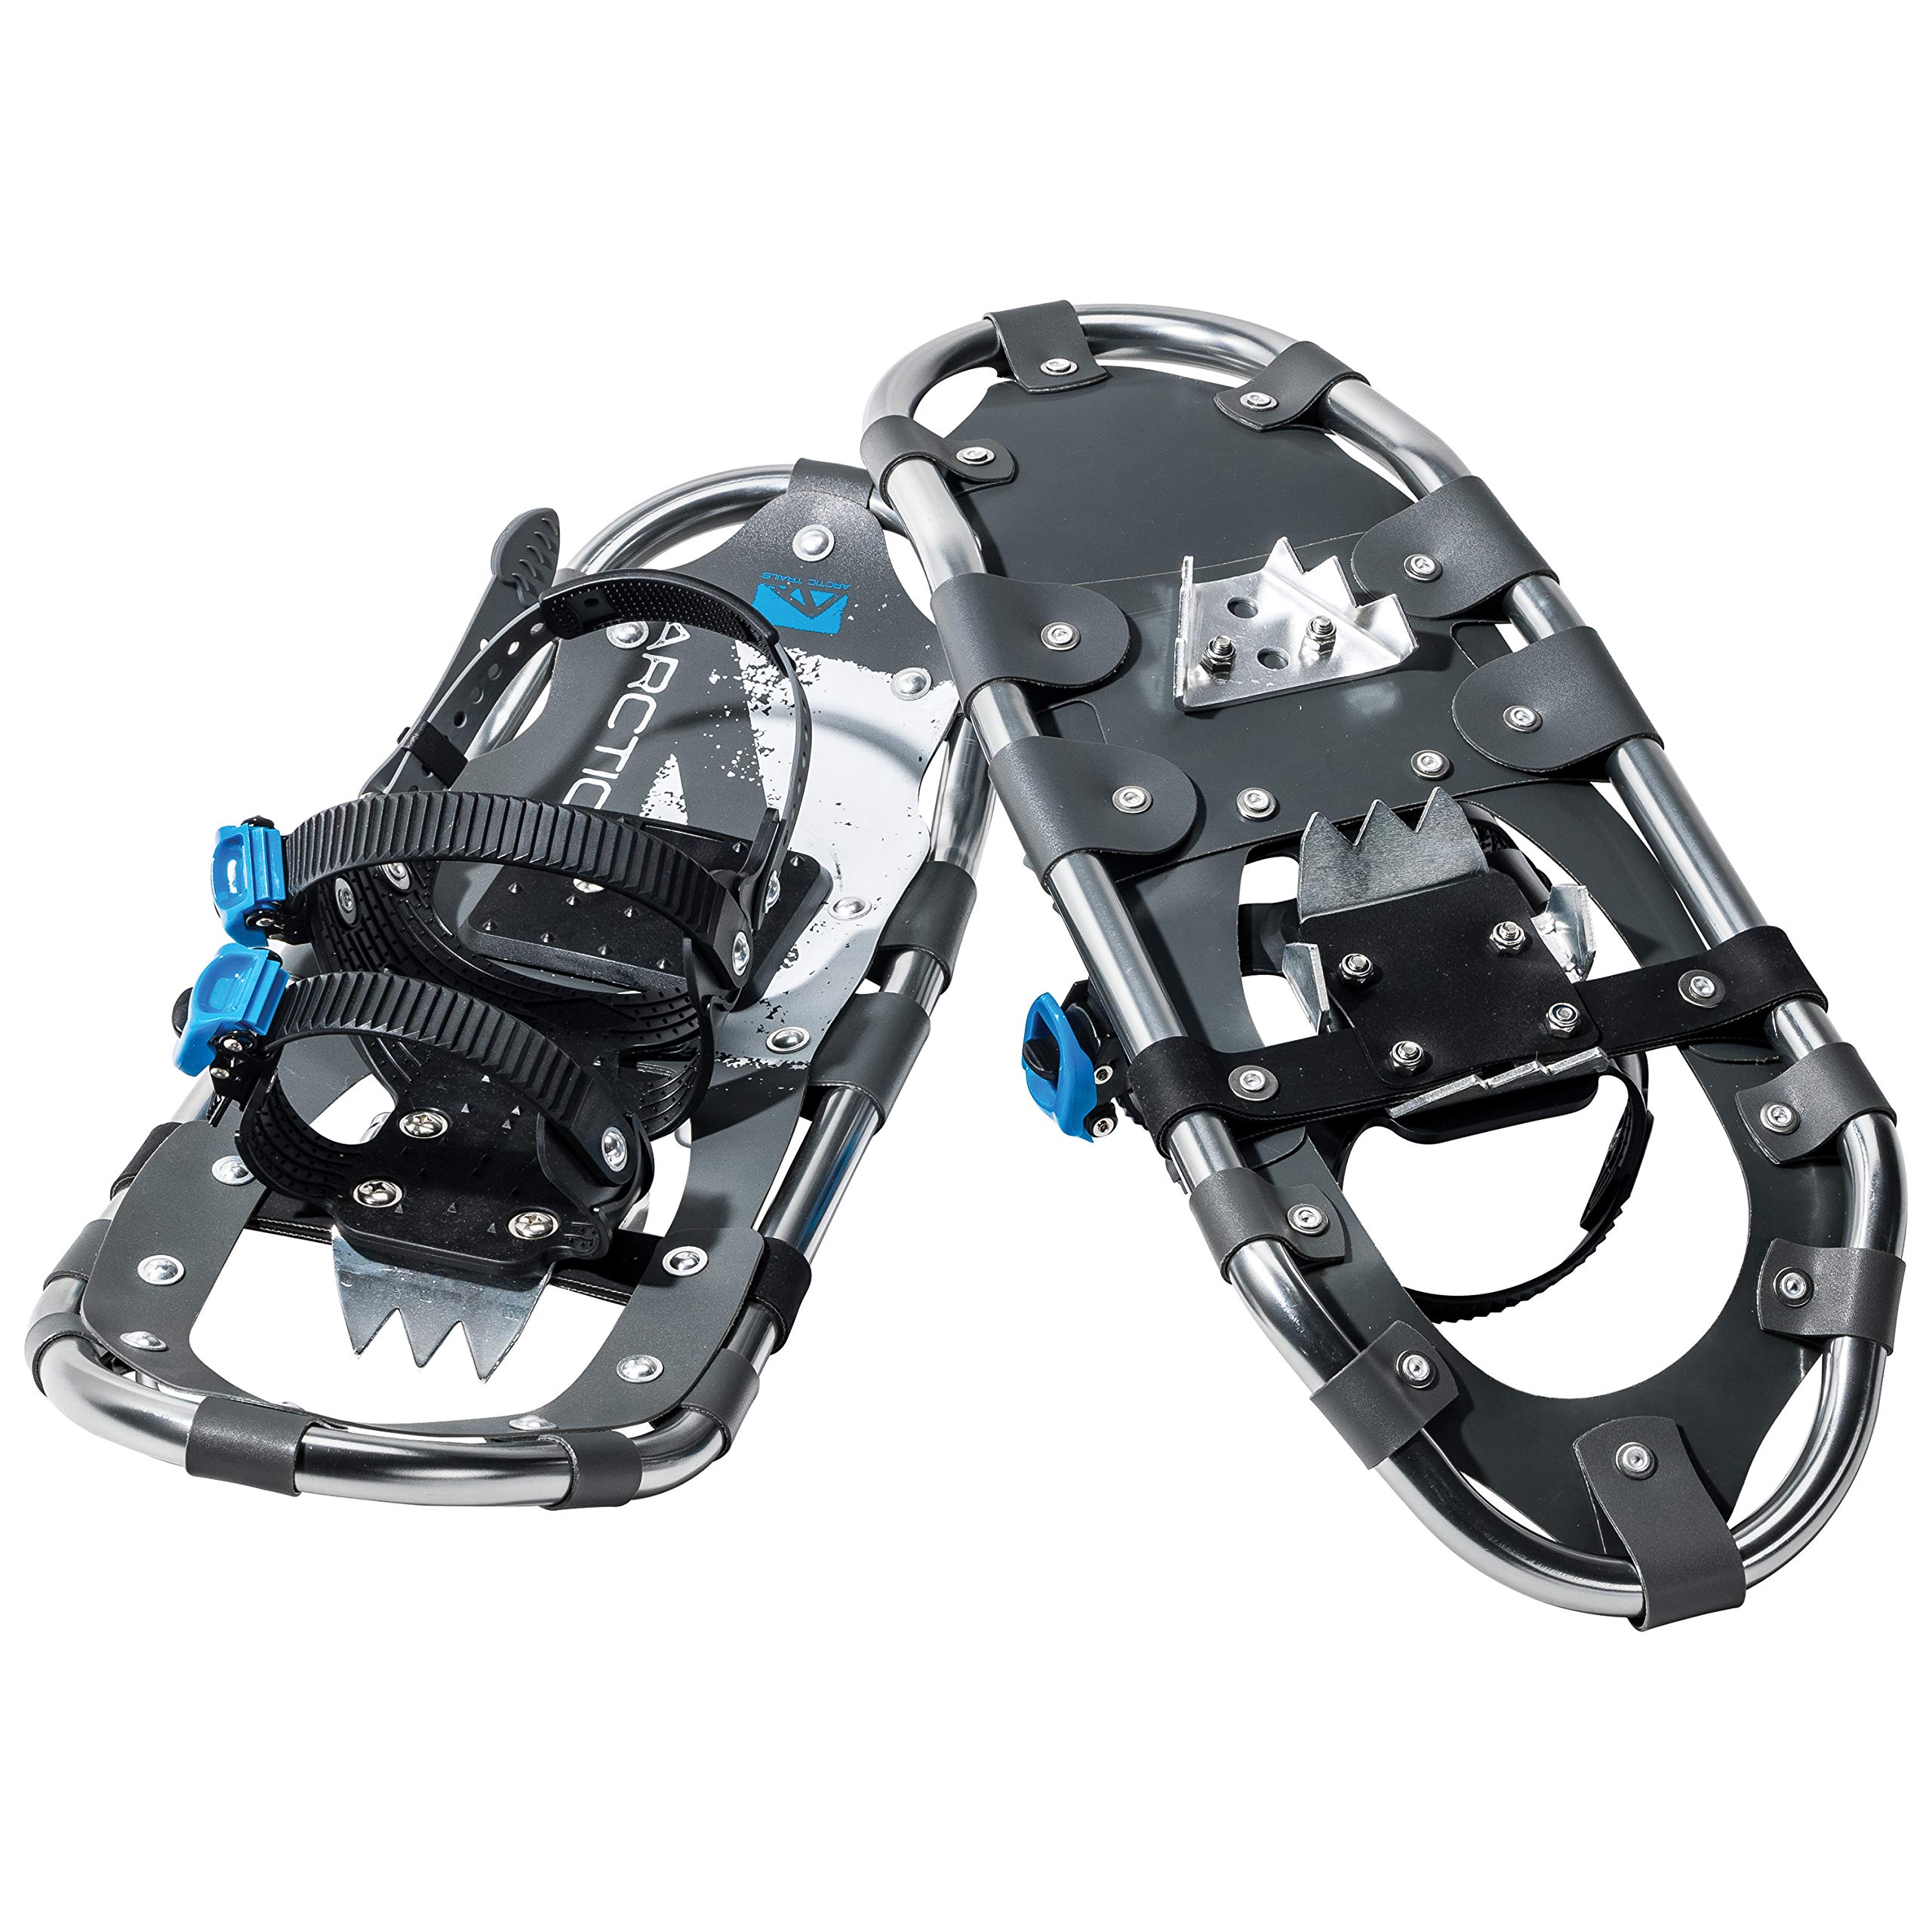 25" Franklin Sports Men's & Women's Arctic Trails Snowshoes $34.95 + Free Shipping